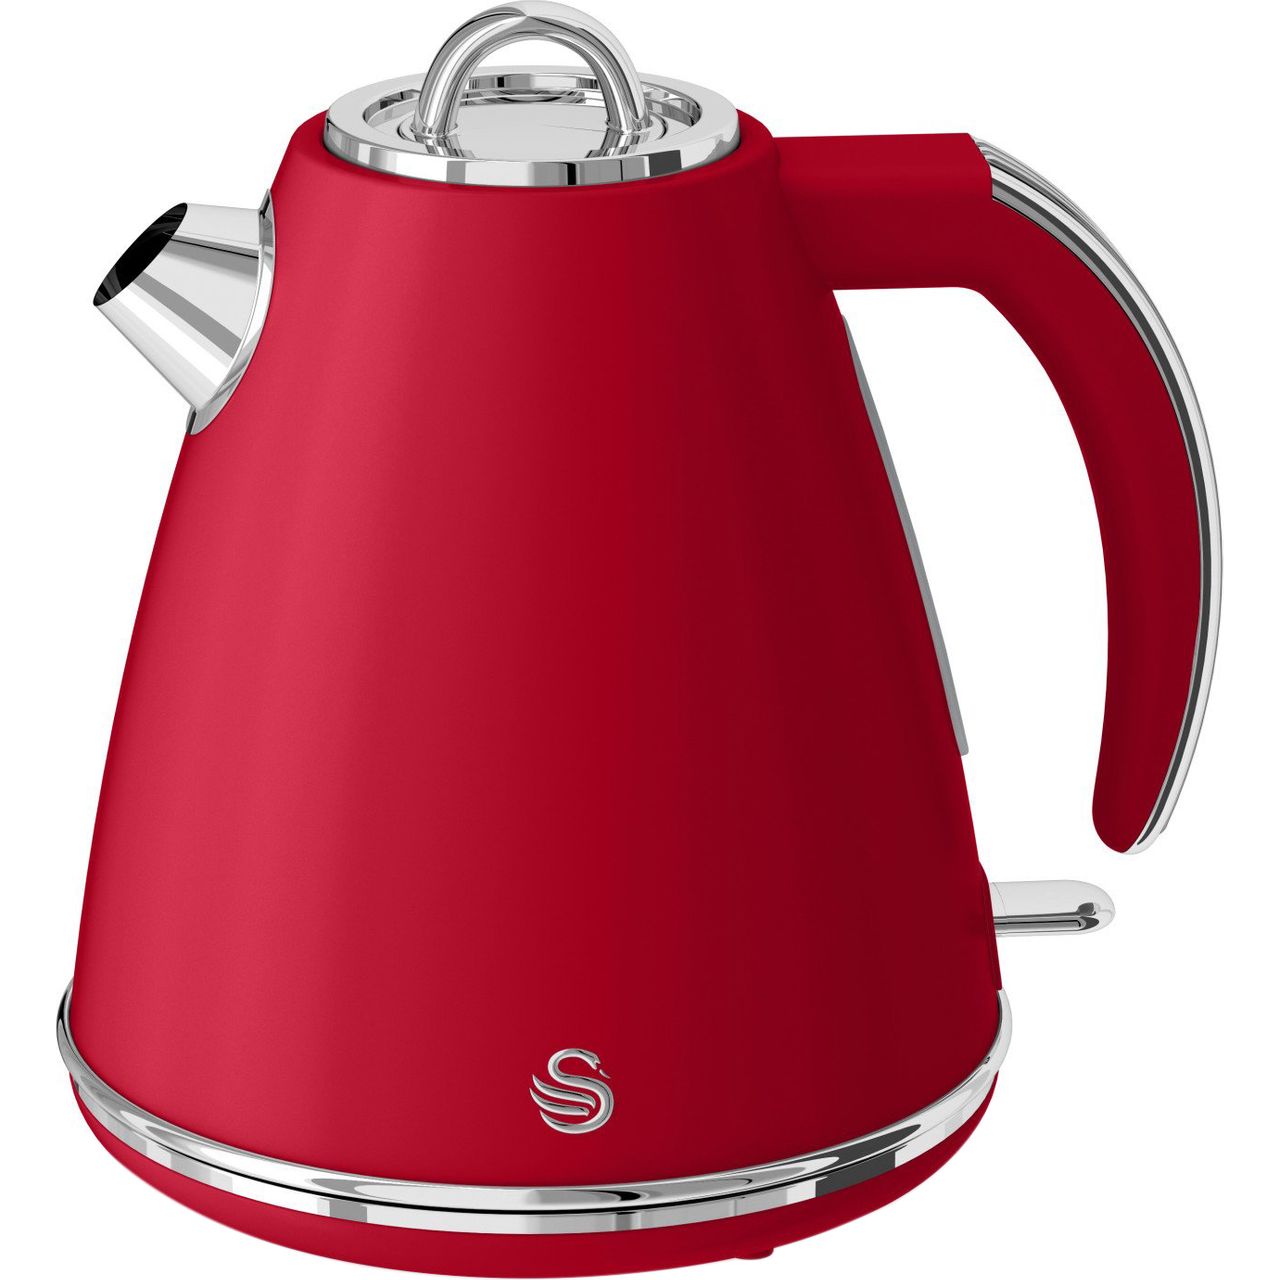 Swan Retro SK19020RN Kettle Review